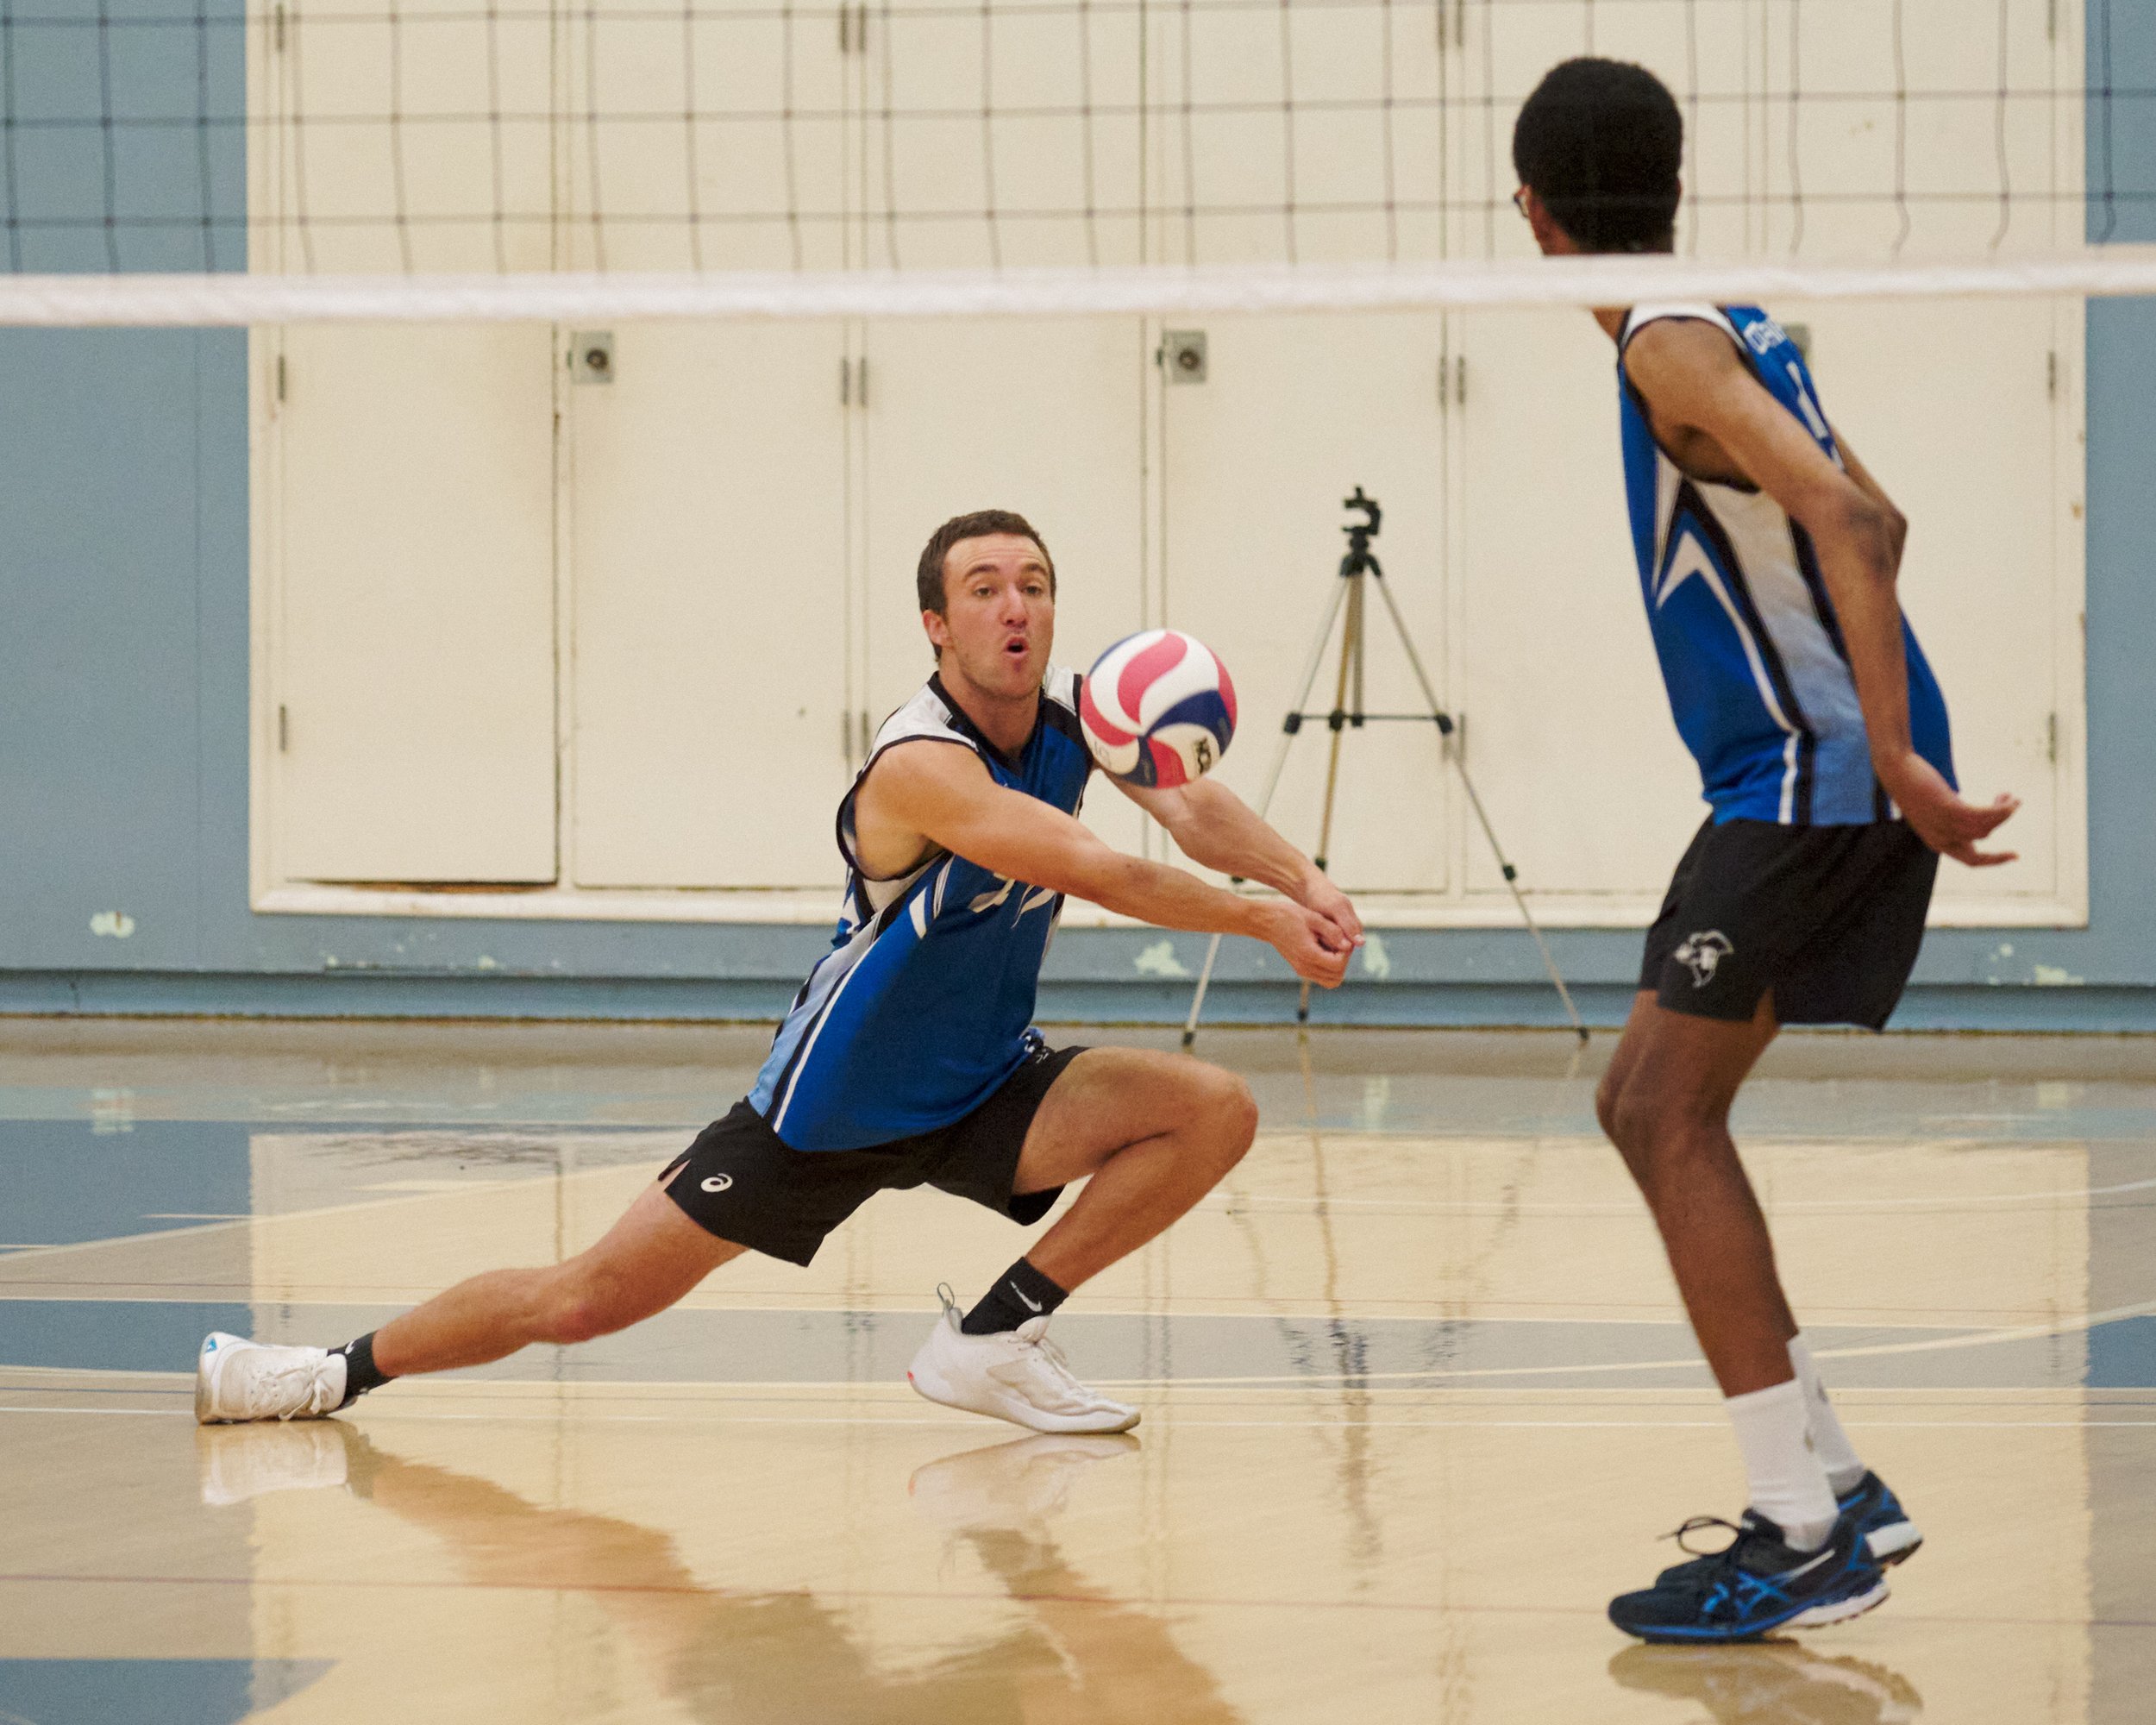  Santa Monica College Corsairs' Kane Schwengel dives for and bumps the ball during the men's volleyball match against the Grossmont College Griffins on Wednesday, Feb. 15, 2023, at Corsair Gym in Santa Monica, Calif. The Corsairs won 3-0. (Nicholas M